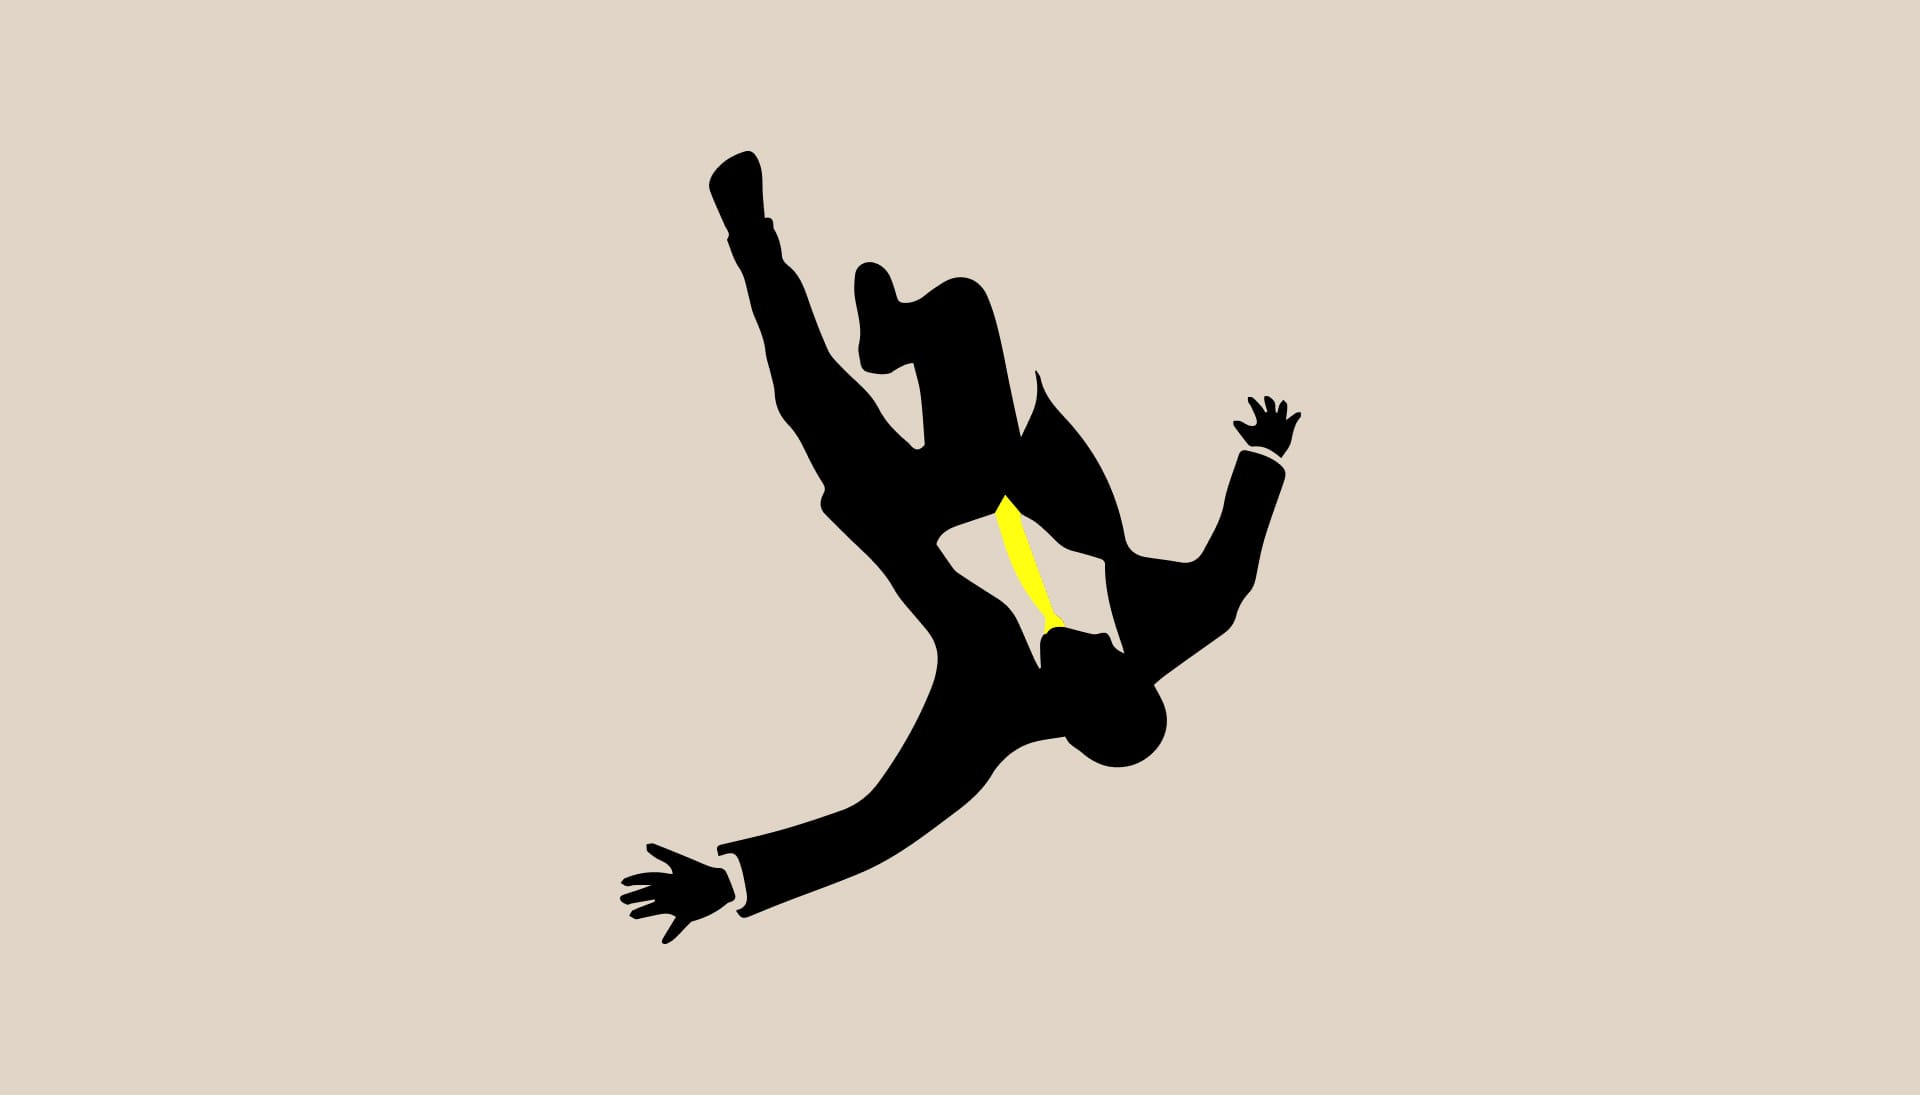 An icon of a business man in a business suit falling